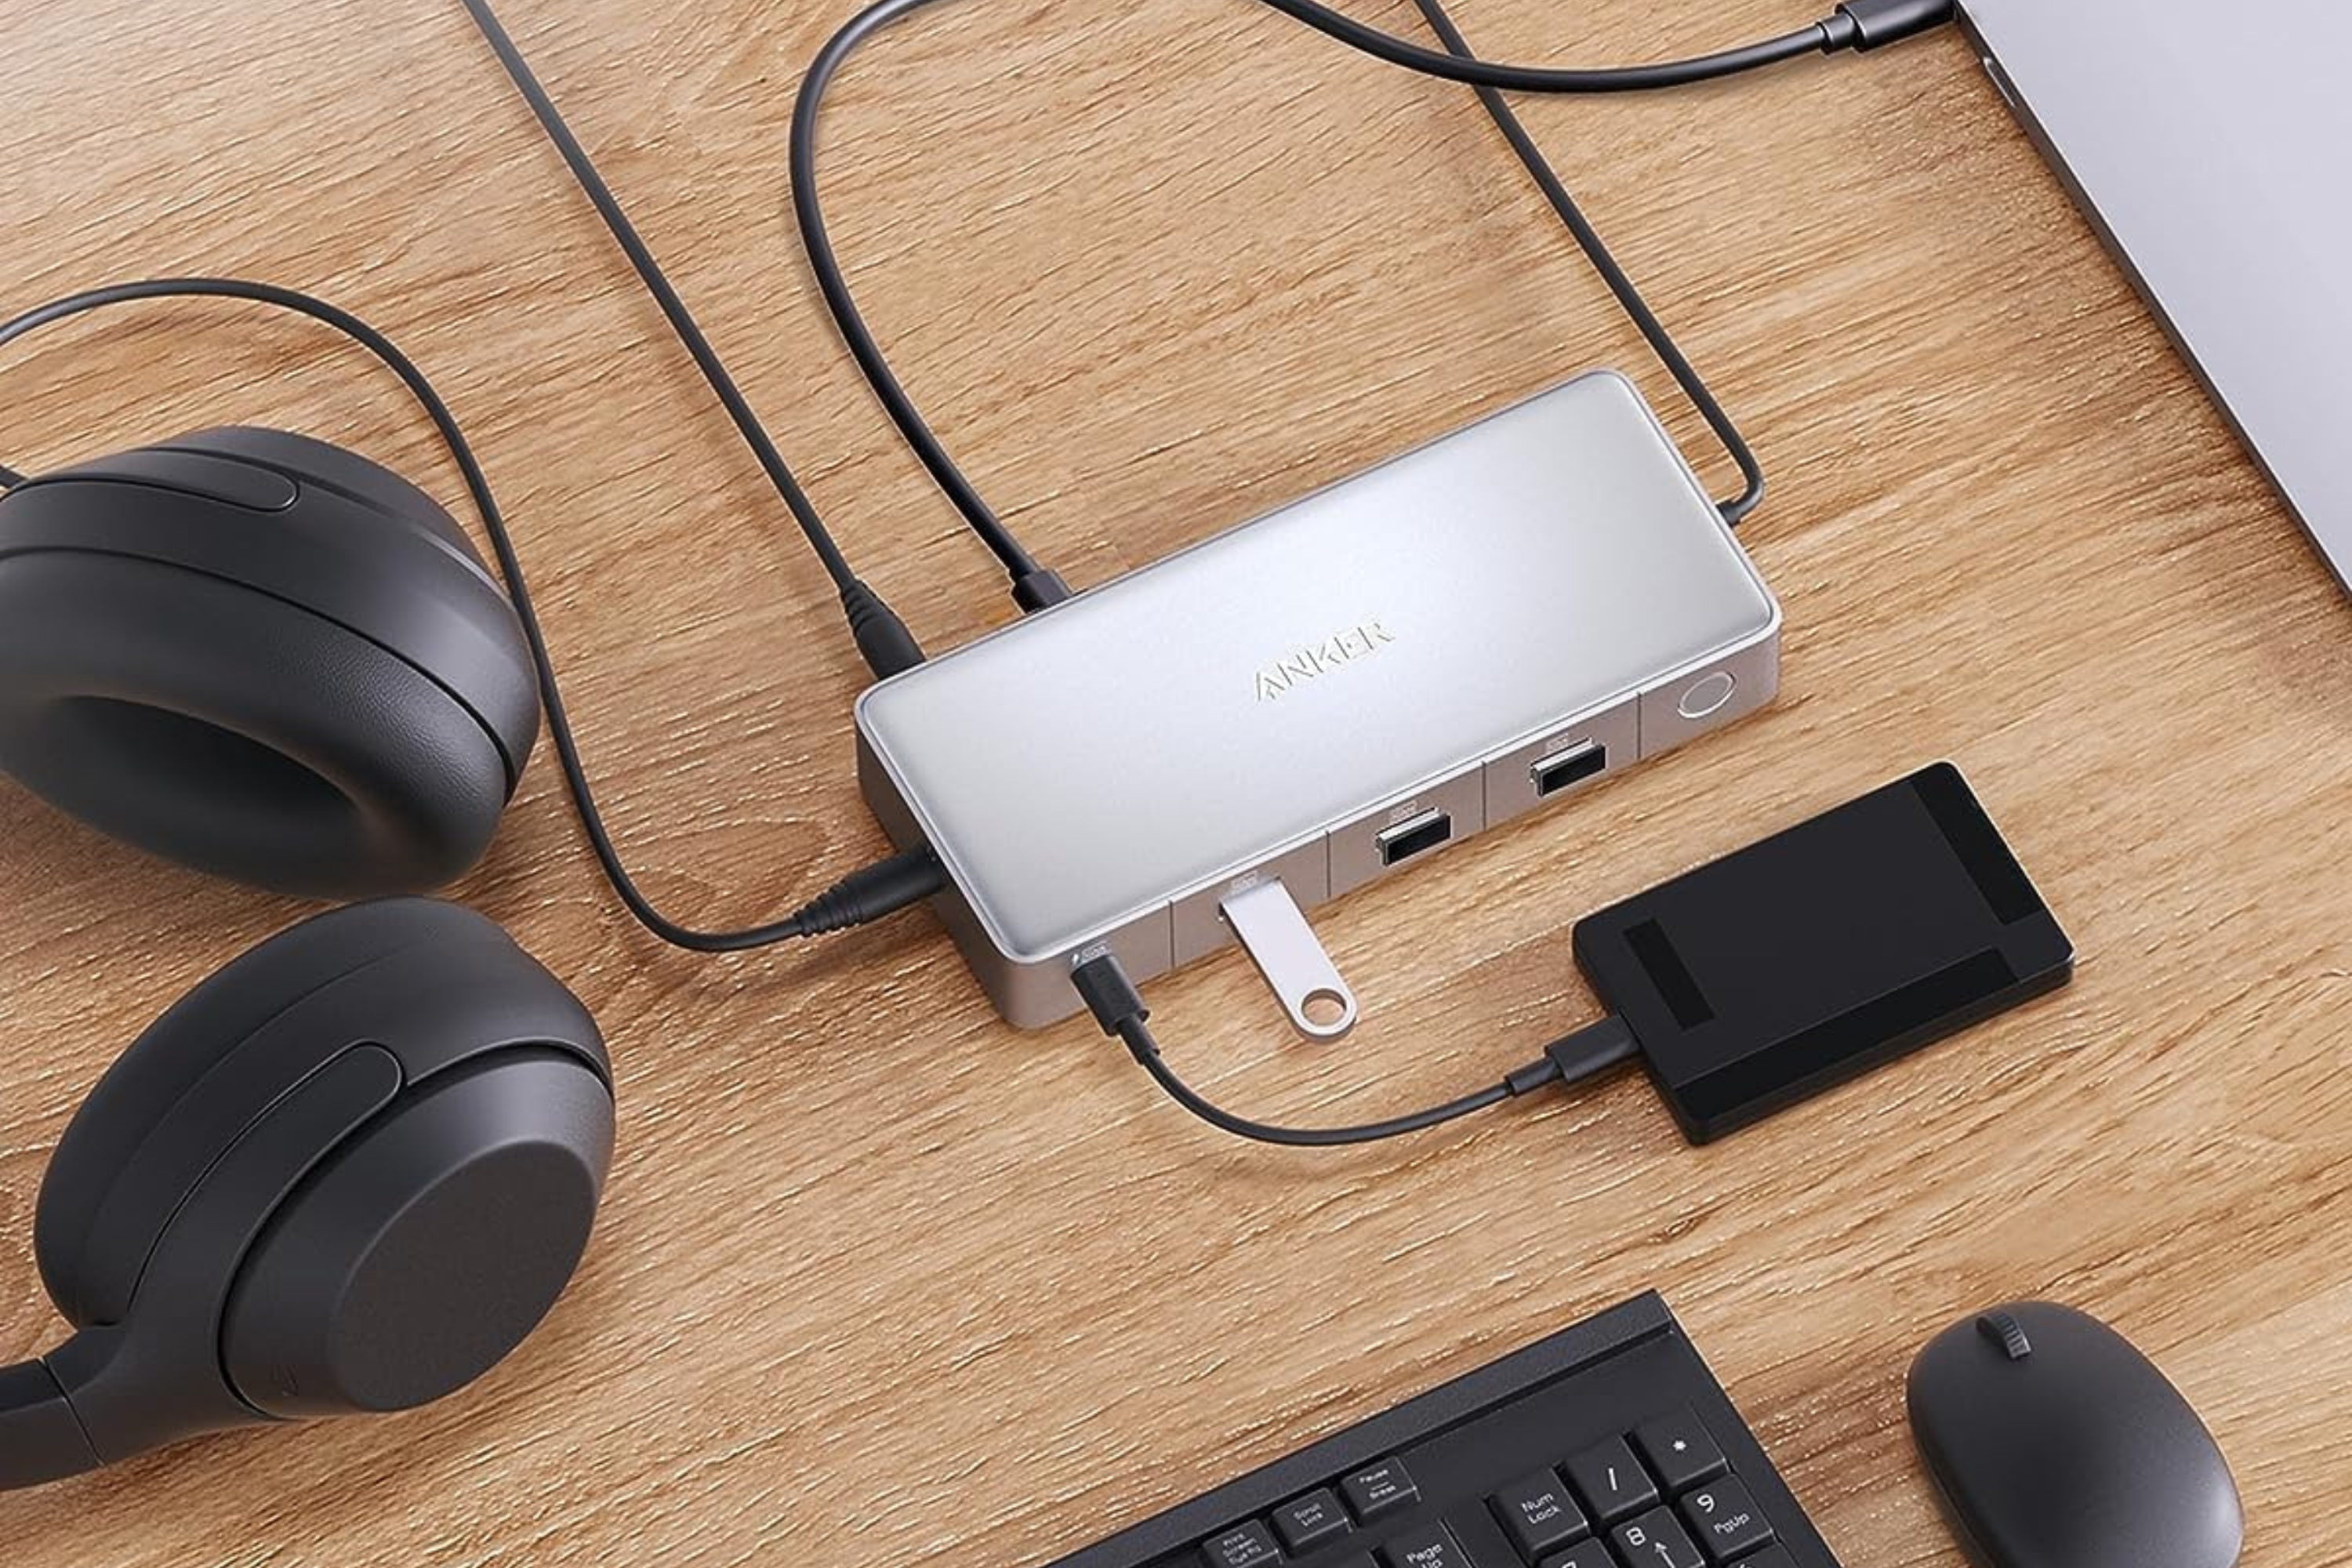 Devices plugged into Anker 553 USB-C Docking Station